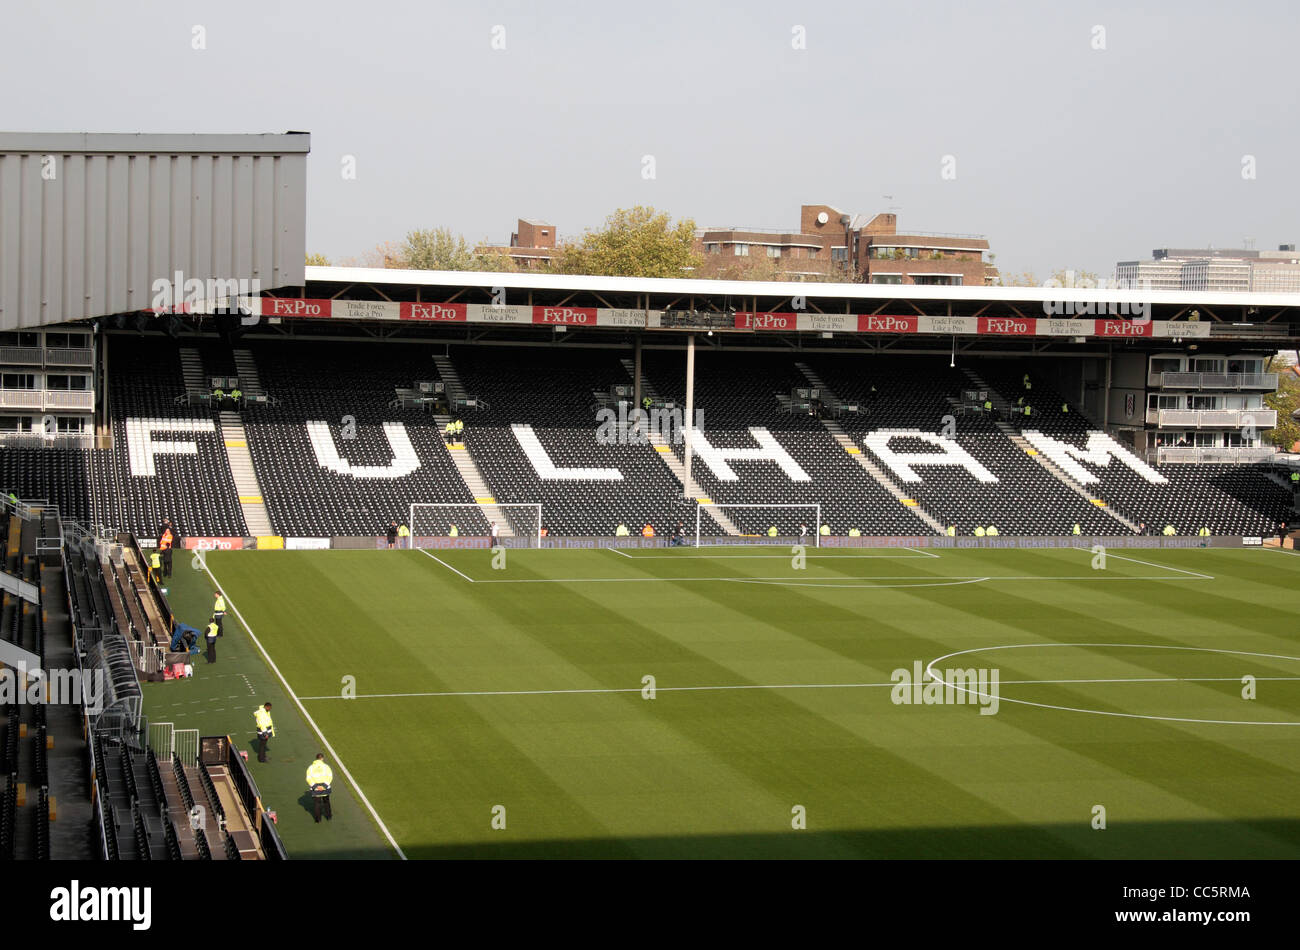 View towards the Hammersmith End of Craven Cottage, home of Fulham Football Club, West London, UK. Stock Photo